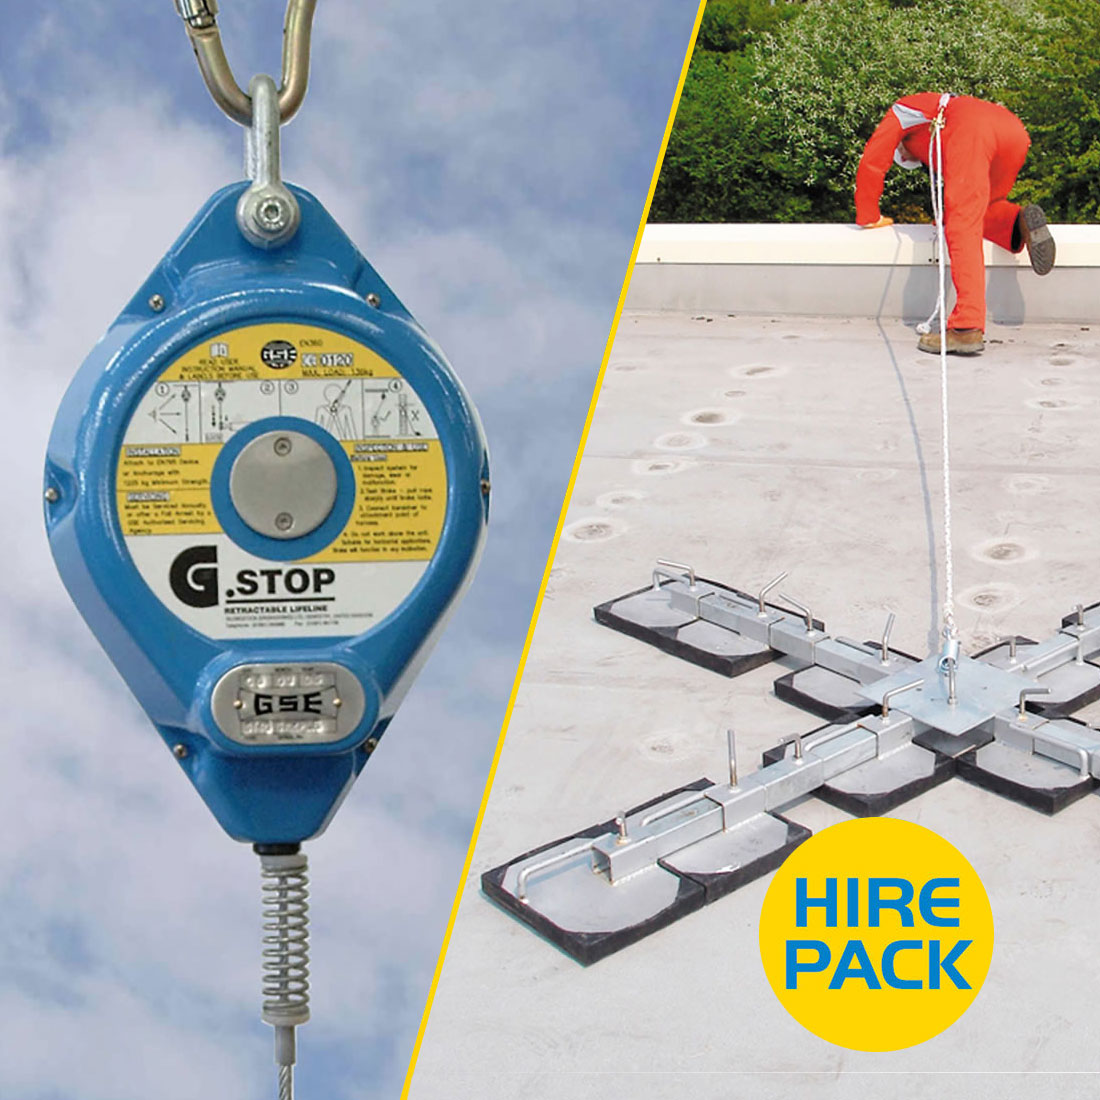 Roof Man Anchor Hire Pack